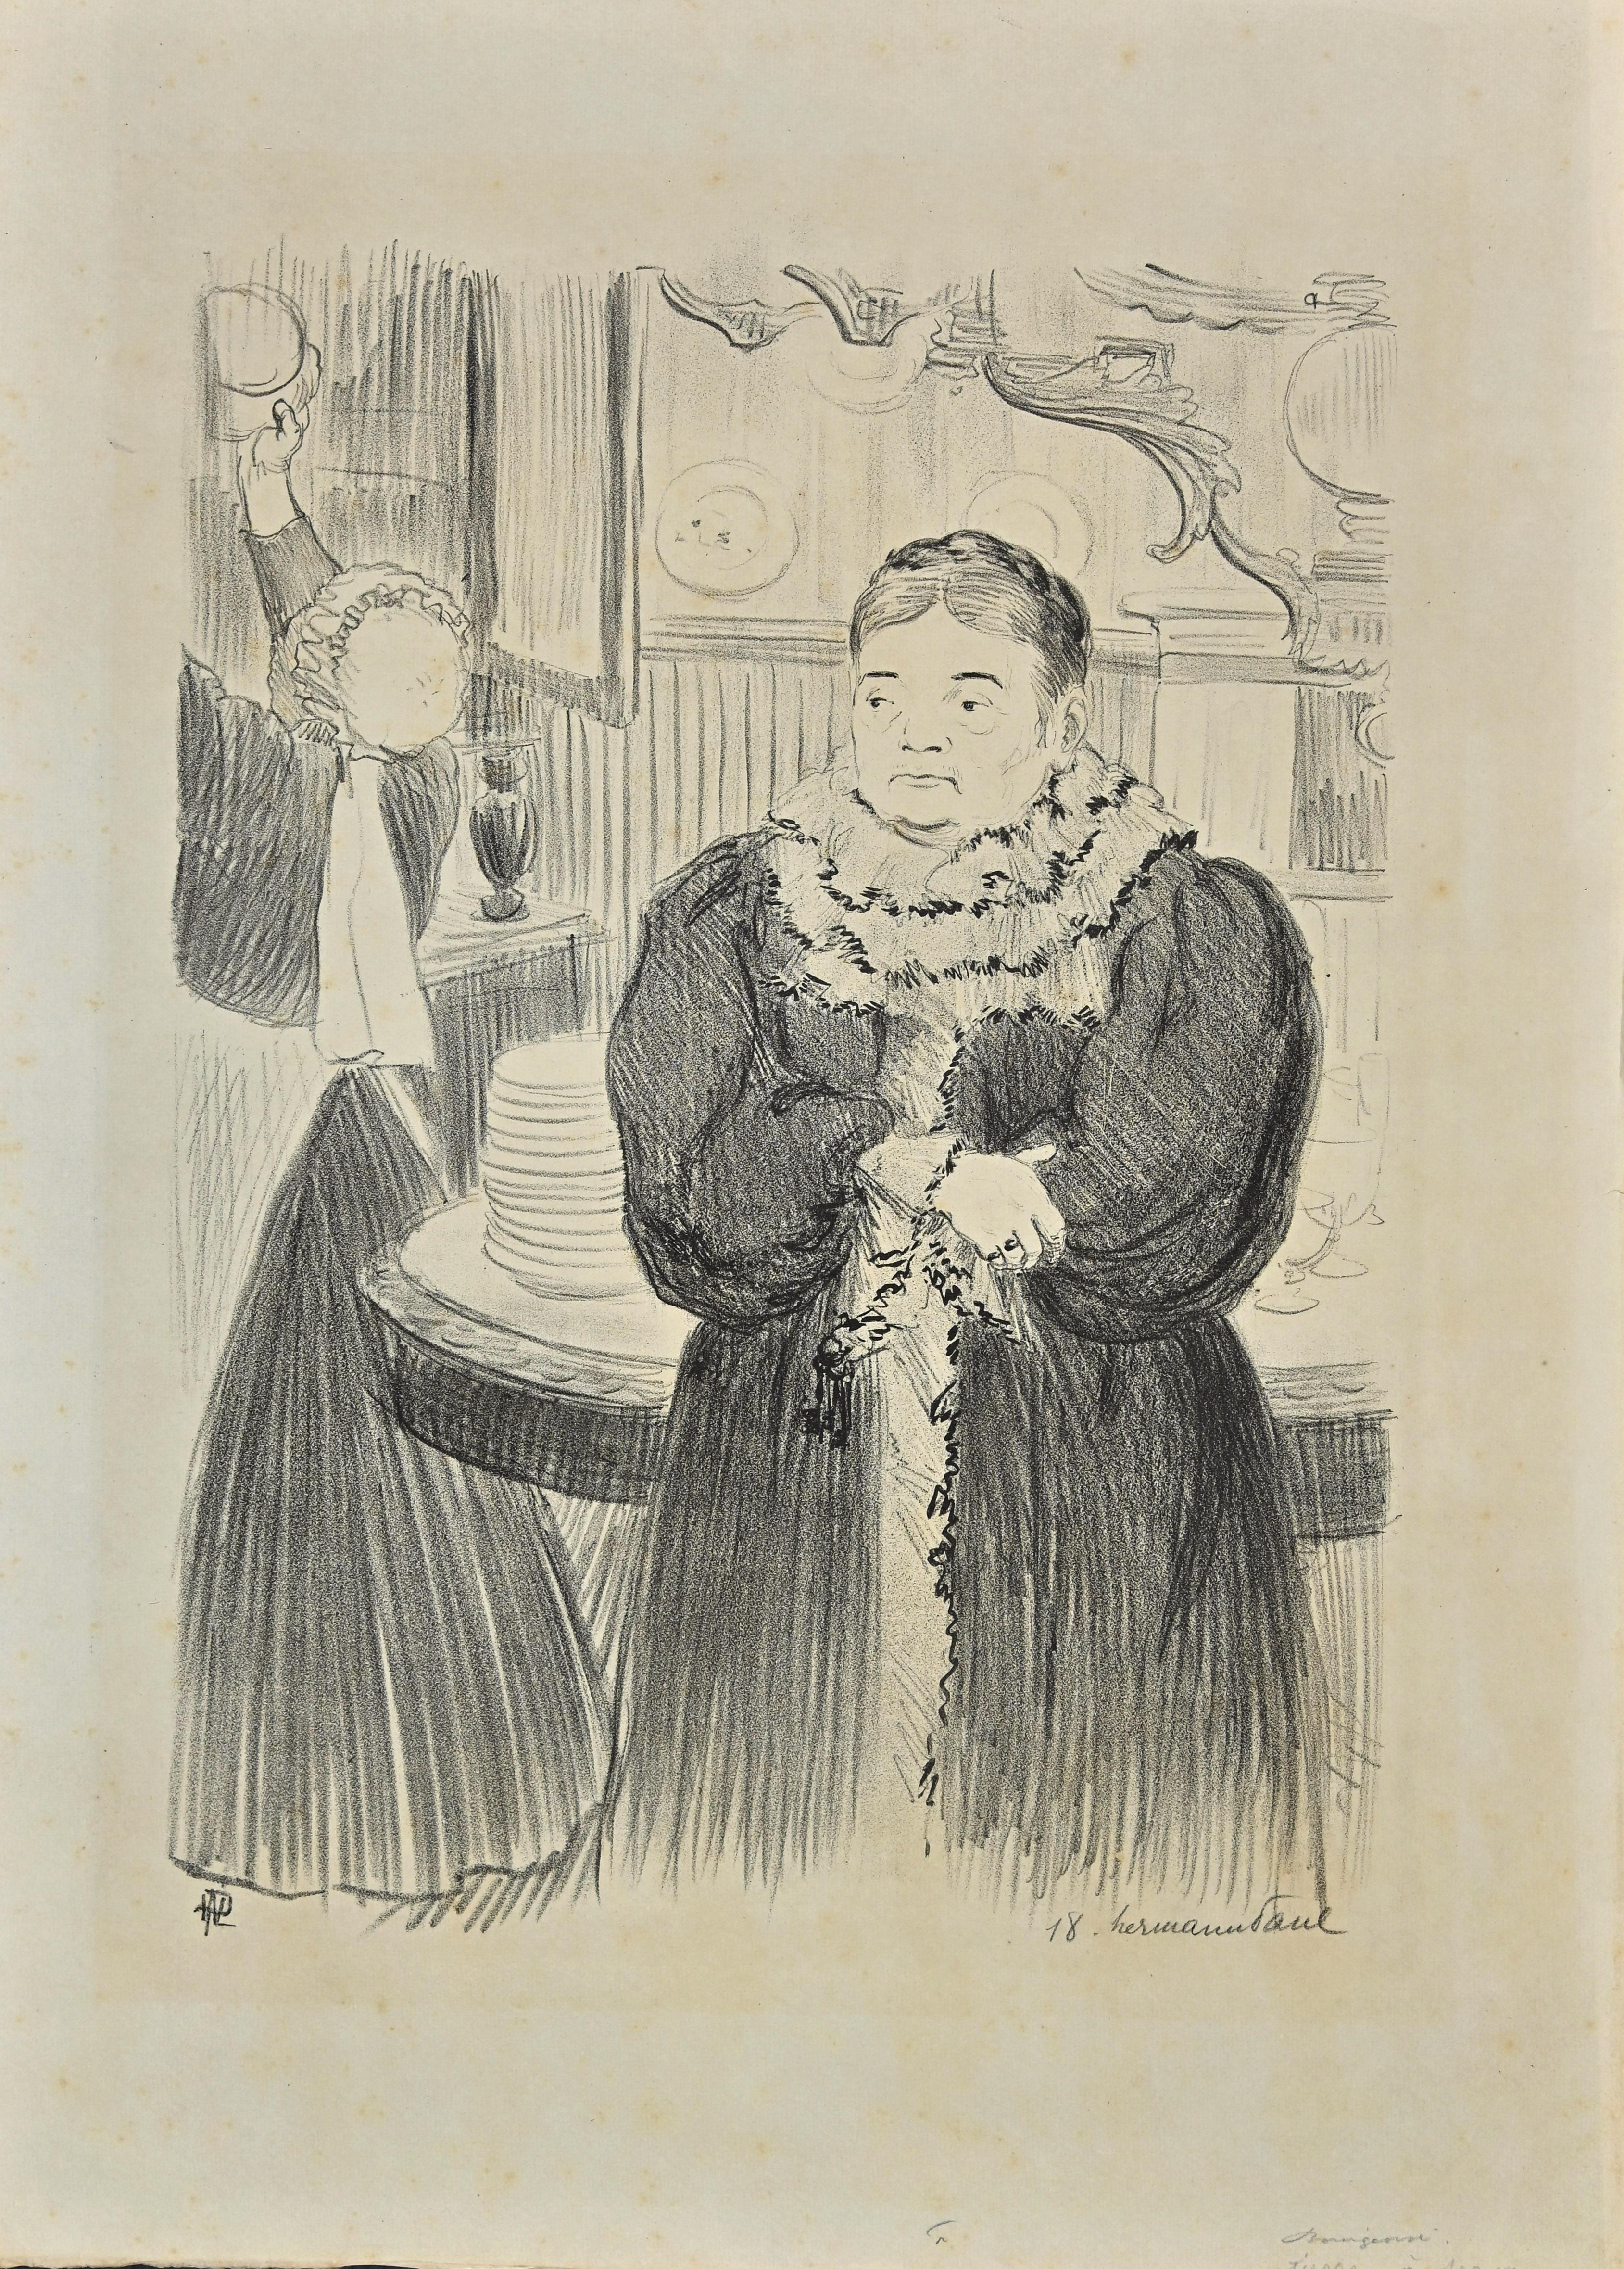 Portrait of Grandmother is a Litograph realized by Hermann Paul.

Hand signed on the lower right corner and monogrammed on the left corner.

Good condition except for some ripples along the edges.

René Georges Hermann-Paul (27 December 1864 – 23